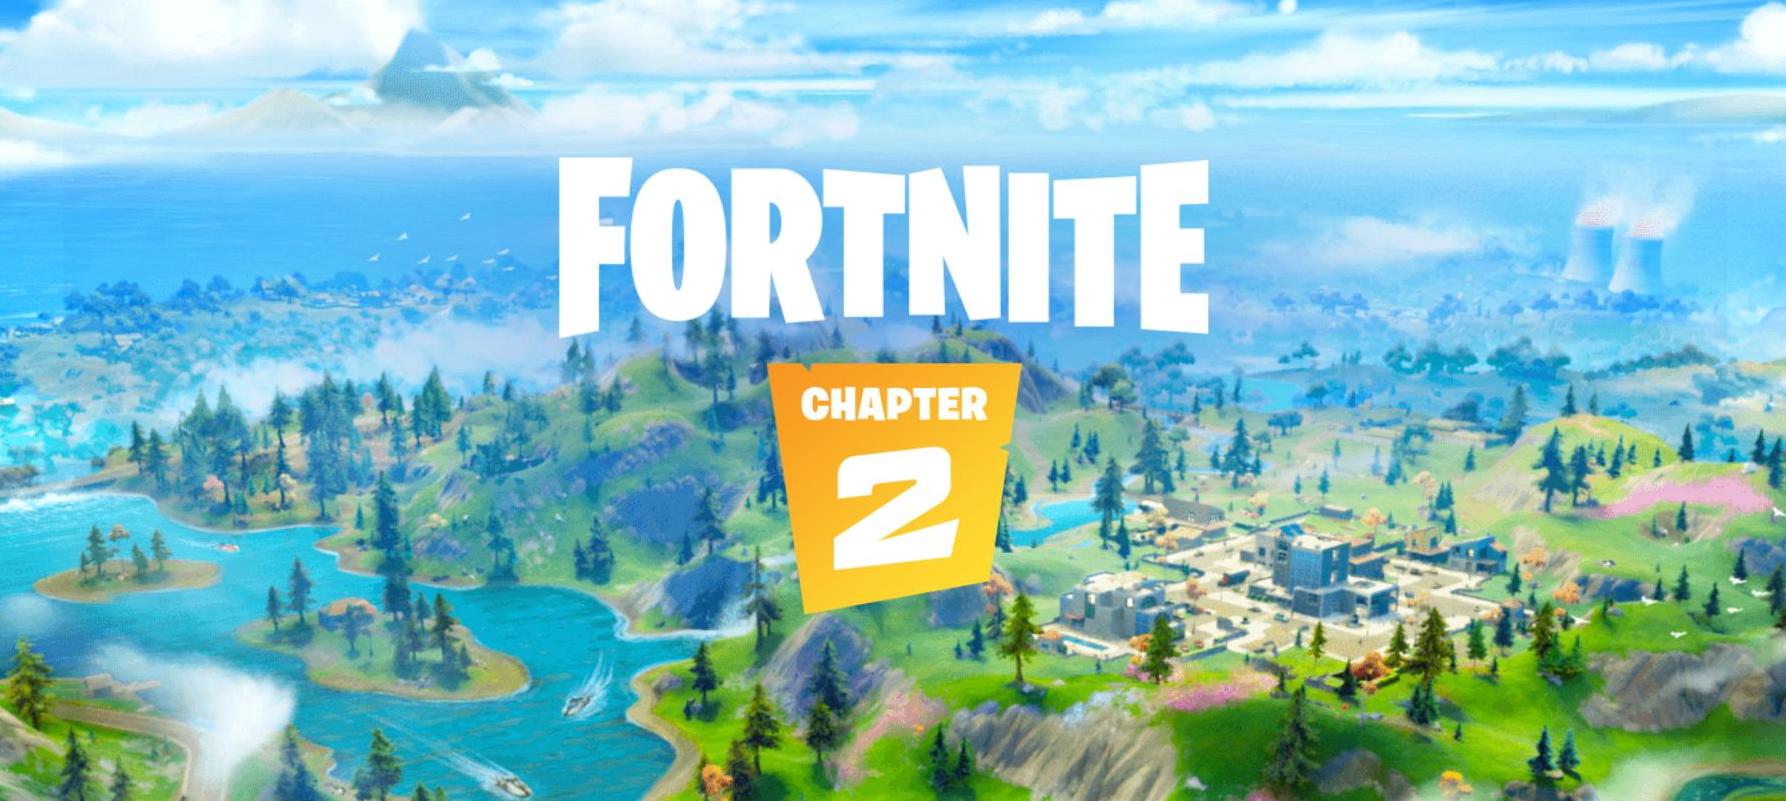 Fortnite Chapter 2 Arrives With An All New Island And Water